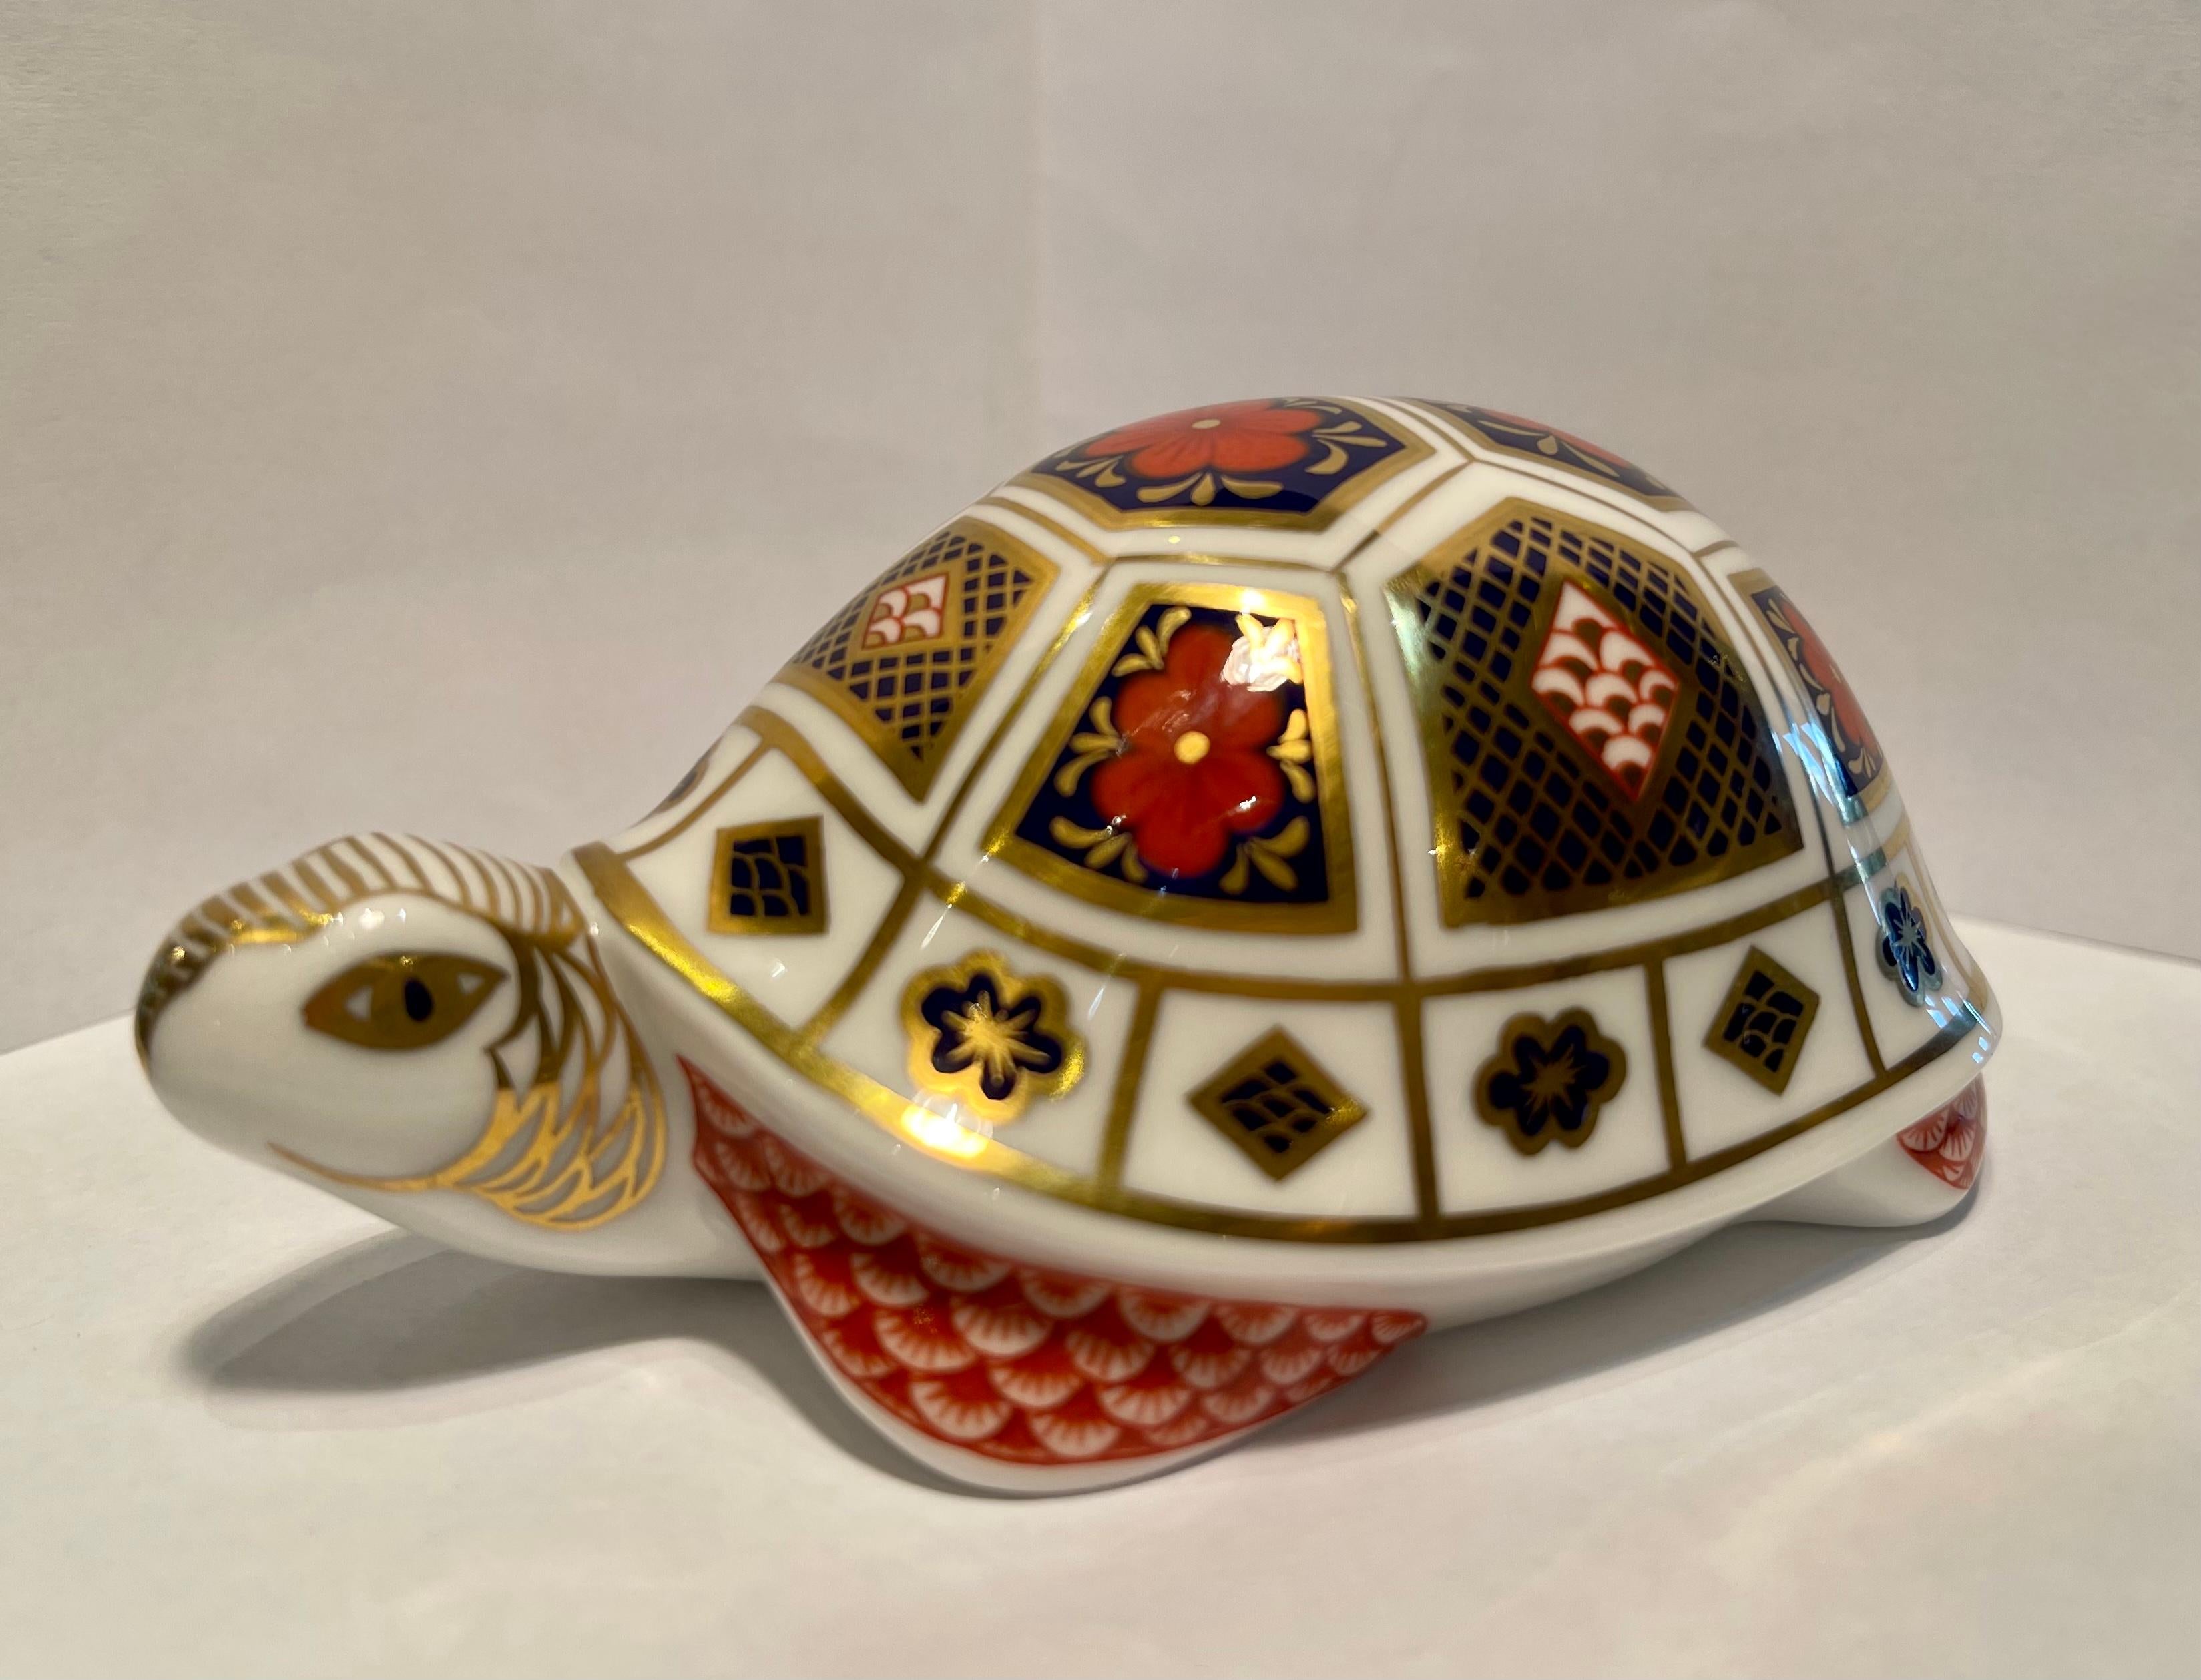 20th Century Retired Royal Crown Derby English Bone China Turtle Figurine or Paperweight